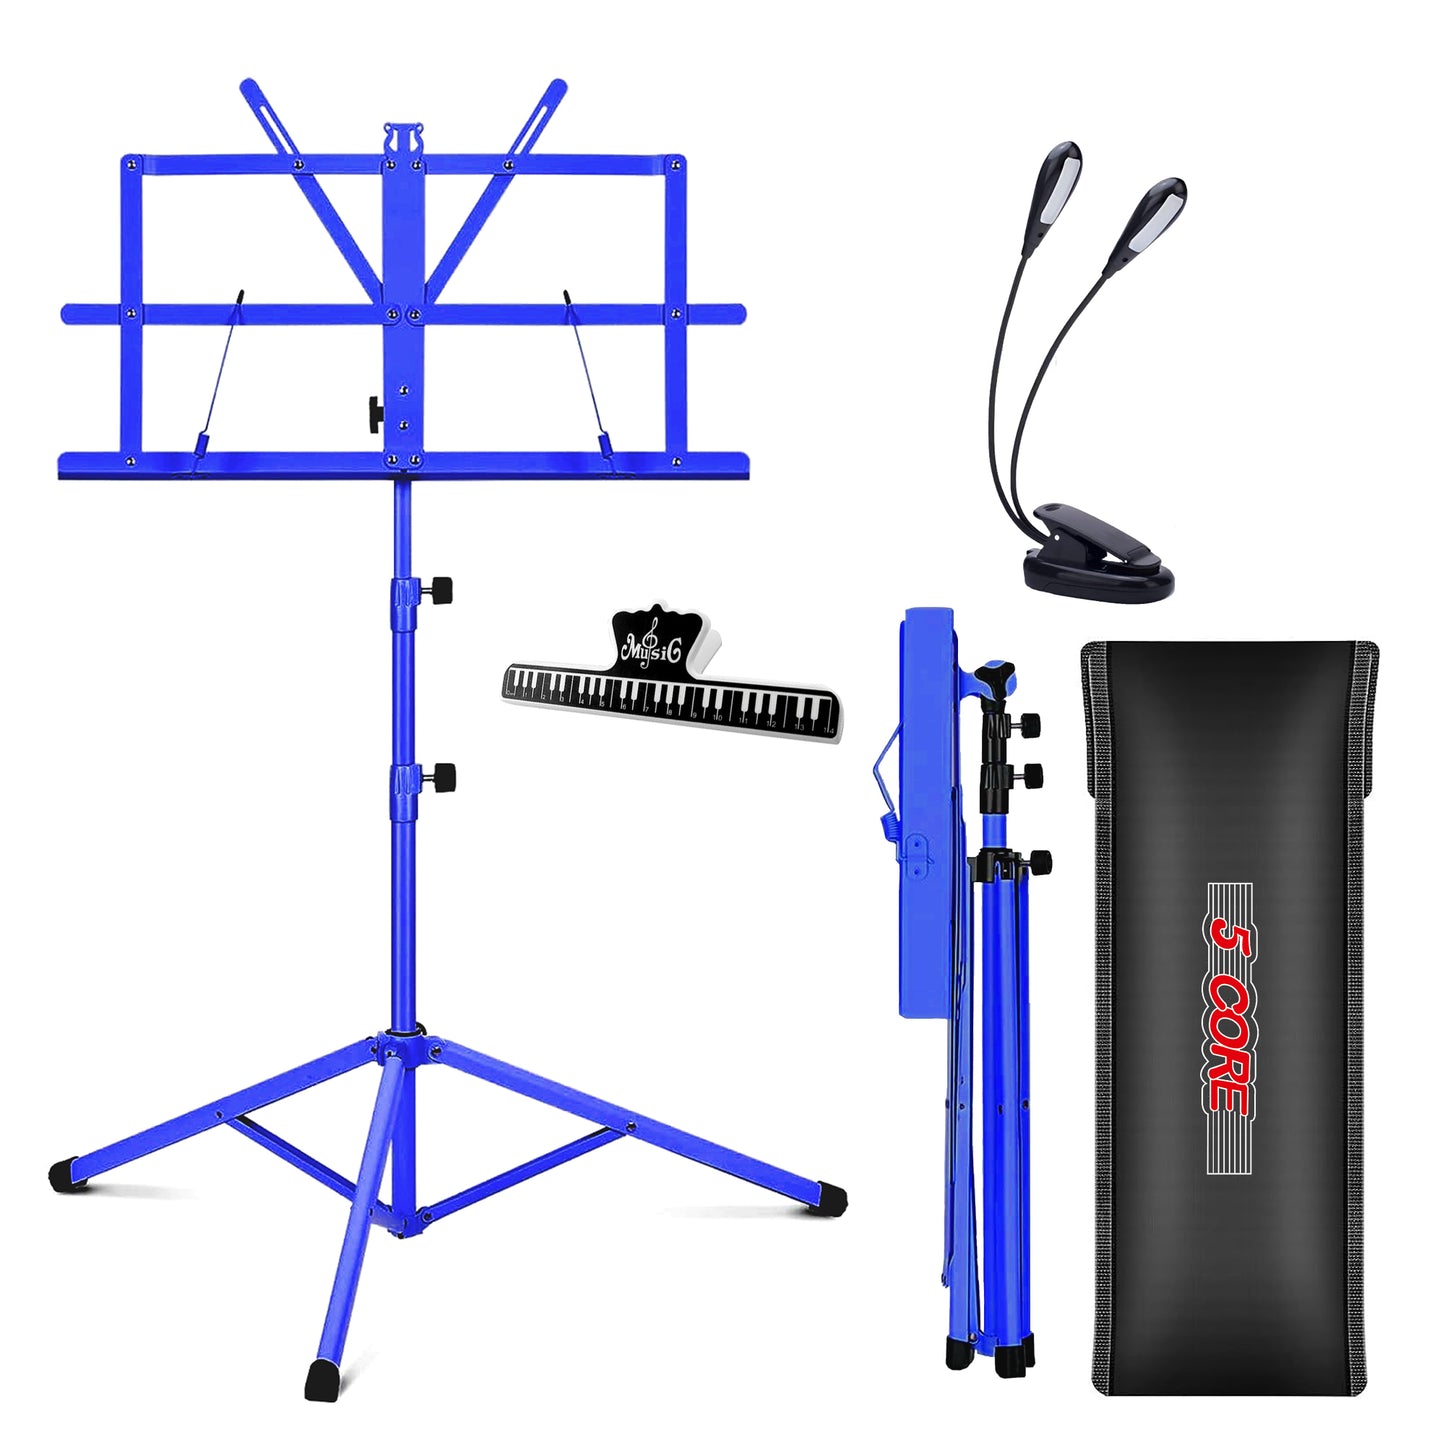 5 Core Music Stand, 2 in 1 Dual-Use Adjustable Folding Sheet Stand Blue / Metal Build Portable Sheet Holder / Carrying Bag, Music Clip and Stand Light Included - MUS FLD BLU